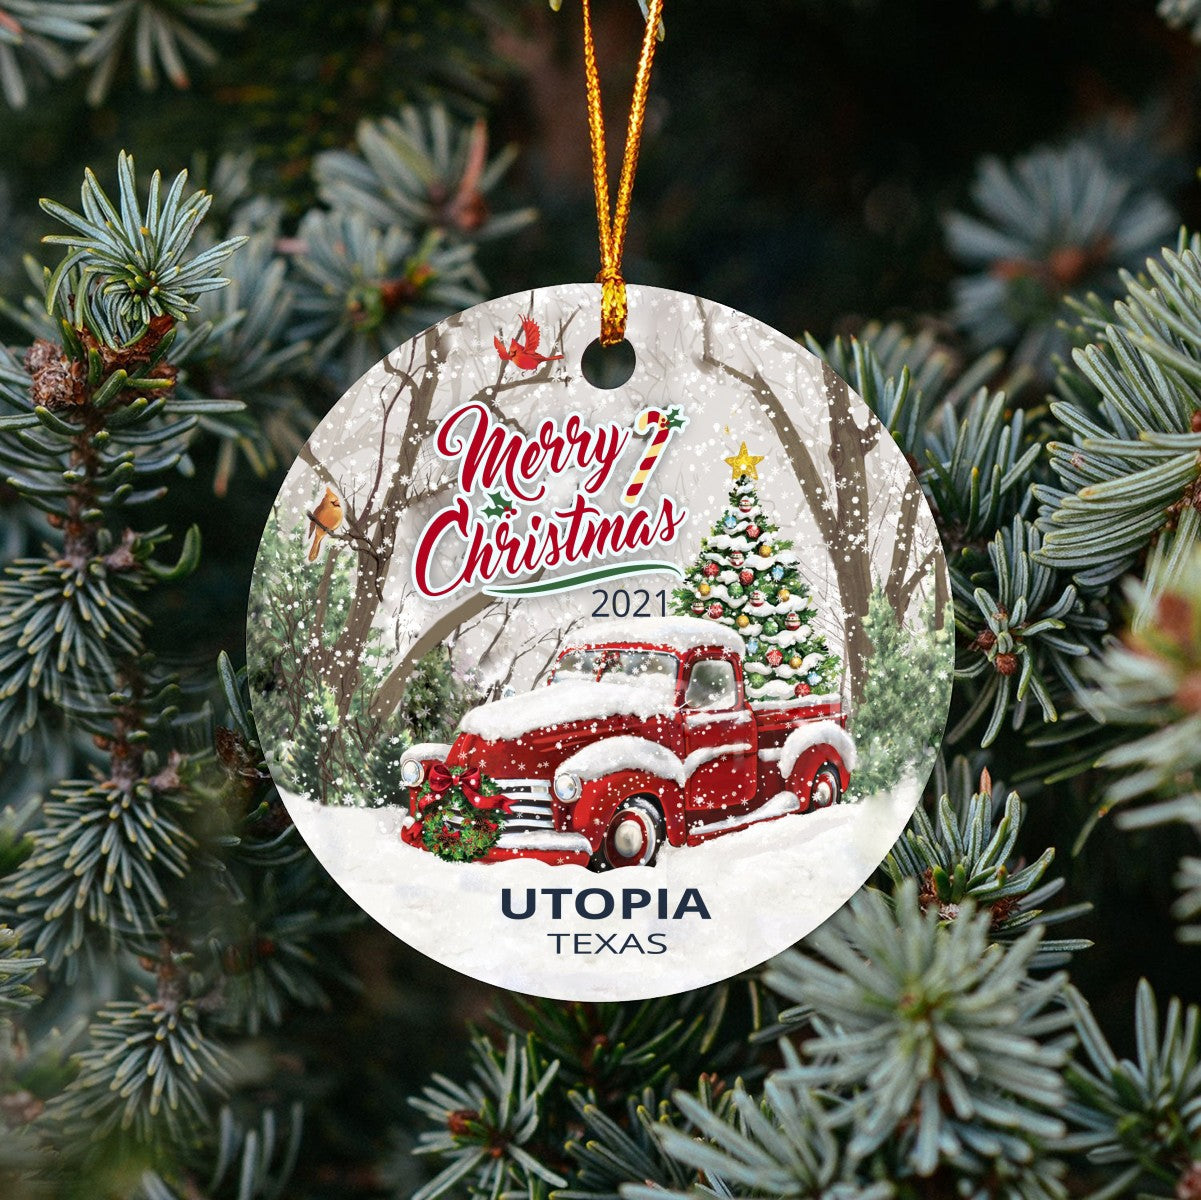 Christmas Tree Ornaments Utopia - Ornament With Name City, State Utopia Texas TX Ornament - Red Truck Xmas Ornaments 3'' Plastic Gift For Family, Friend And Housewarming